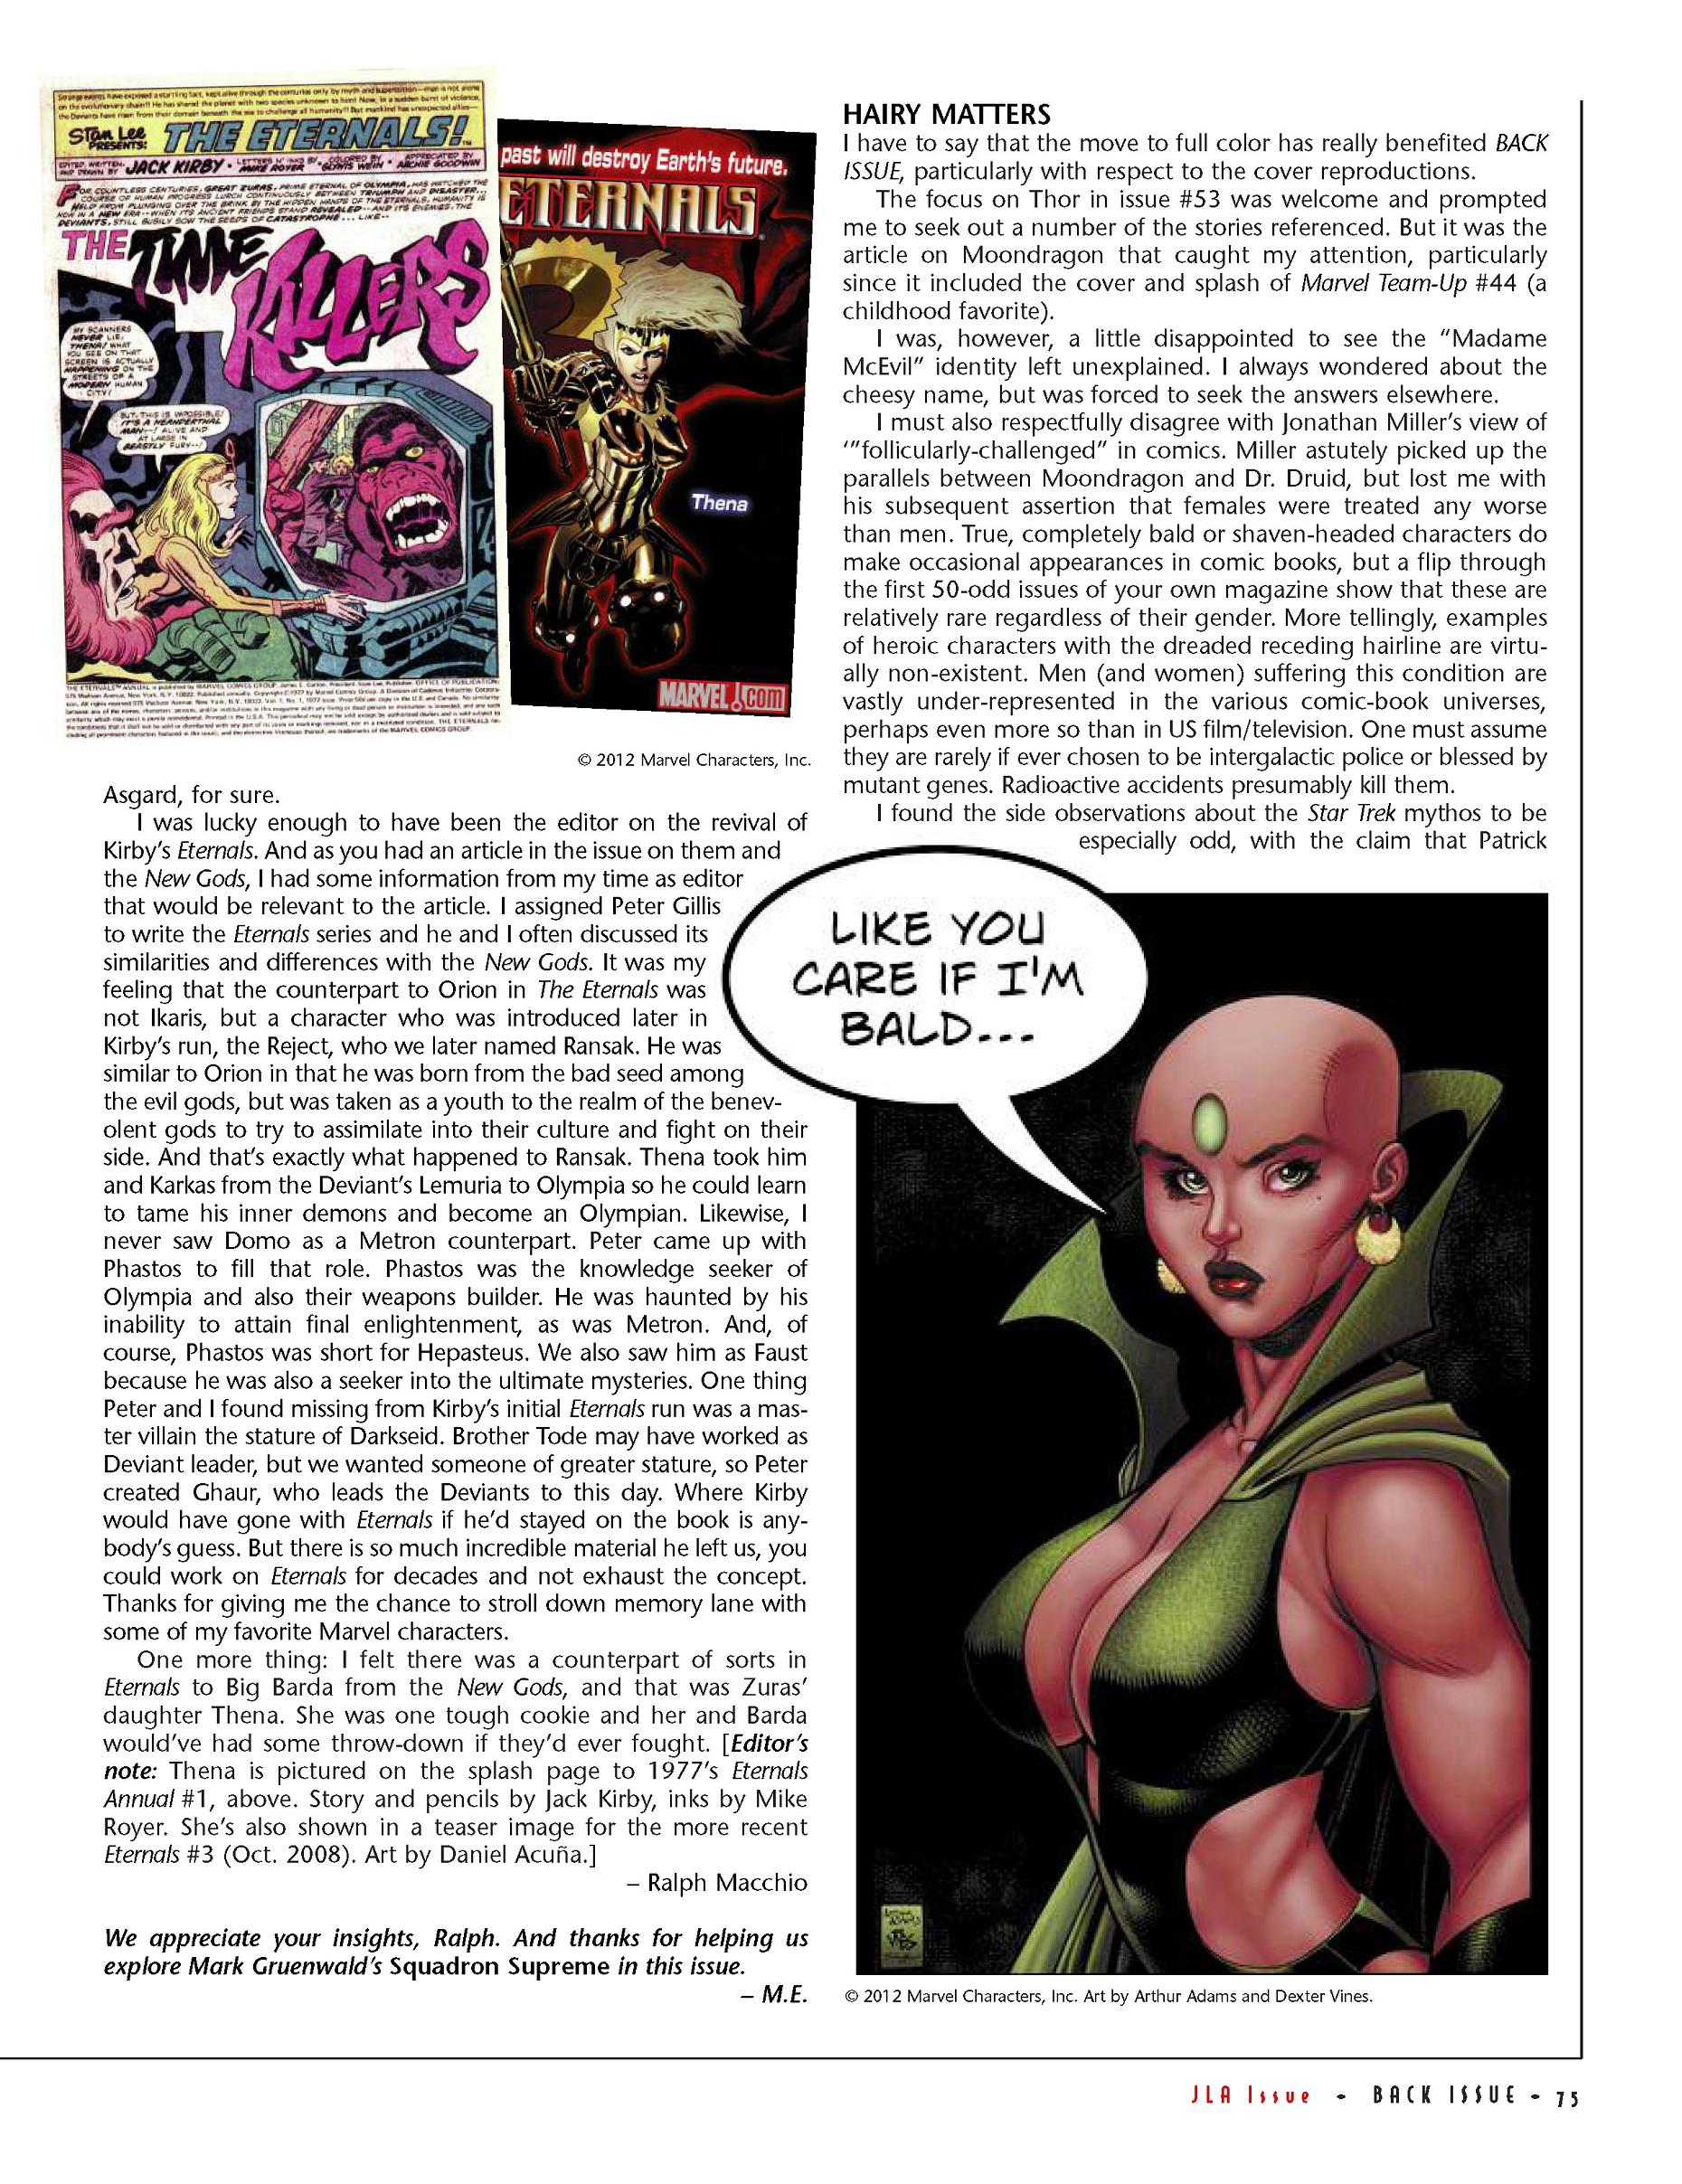 Read online Back Issue comic -  Issue #58 - 75